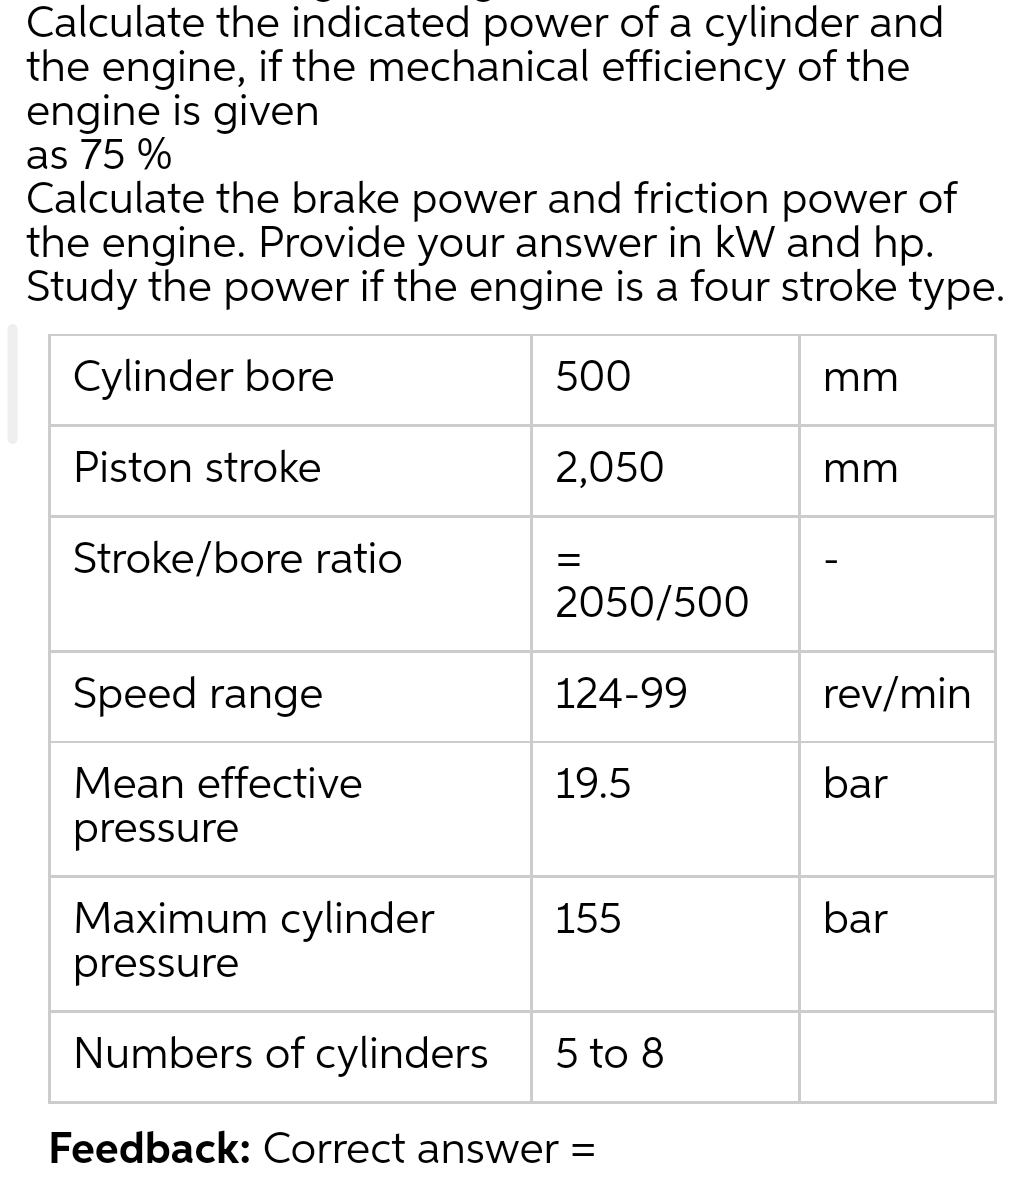 Calculate the indicated power of a cylinder and
the engine, if the mechanical efficiency of the
engine is given
as 75 %
Calculate the brake power and friction power of
the engine. Provide your answer in kW and hp.
Study the power if the engine is a four stroke type.
Cylinder bore
500
Piston stroke
2,050
Stroke/bore ratio
Speed range
Mean effective
pressure
=
2050/500
124-99
19.5
Maximum cylinder
pressure
Numbers of cylinders 5 to 8
Feedback: Correct answer =
155
mm
mm
rev/min
bar
bar